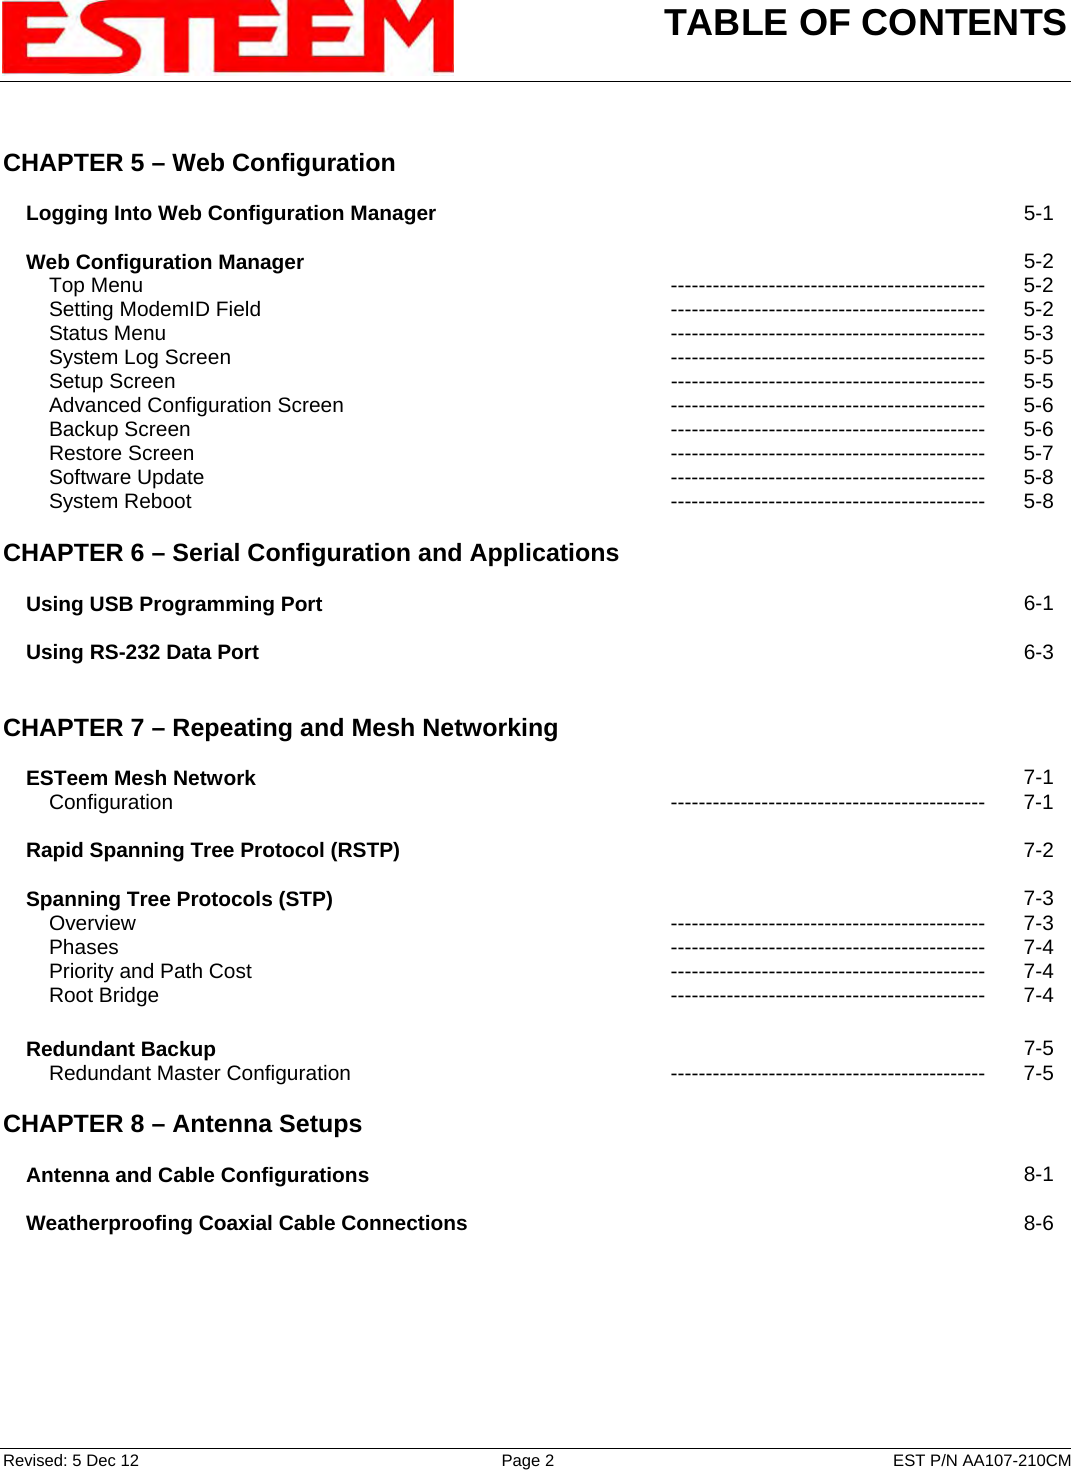 TABLE OF CONTENTS    Revised: 5 Dec 12  Page 2  EST P/N AA107-210CM  CHAPTER 5 – Web Configuration         Logging Into Web Configuration Manager   5-1        Web Configuration Manager   5-2         Top Menu  ---------------------------------------------  5-2         Setting ModemID Field --------------------------------------------- 5-2         Status Menu  ---------------------------------------------  5-3         System Log Screen --------------------------------------------- 5-5         Setup Screen  ---------------------------------------------  5-5         Advanced Configuration Screen --------------------------------------------- 5-6         Backup Screen  ---------------------------------------------  5-6         Restore Screen  ---------------------------------------------  5-7         Software Update --------------------------------------------- 5-8         System Reboot --------------------------------------------- 5-8    CHAPTER 6 – Serial Configuration and Applications         Using USB Programming Port   6-1        Using RS-232 Data Port   6-3       CHAPTER 7 – Repeating and Mesh Networking          ESTeem Mesh Network   7-1         Configuration --------------------------------------------- 7-1        Rapid Spanning Tree Protocol (RSTP)   7-2        Spanning Tree Protocols (STP)   7-3         Overview --------------------------------------------- 7-3         Phases --------------------------------------------- 7-4         Priority and Path Cost --------------------------------------------- 7-4         Root Bridge --------------------------------------------- 7-4        Redundant Backup   7-5         Redundant Master Configuration --------------------------------------------- 7-5    CHAPTER 8 – Antenna Setups          Antenna and Cable Configurations   8-1        Weatherproofing Coaxial Cable Connections   8-6       